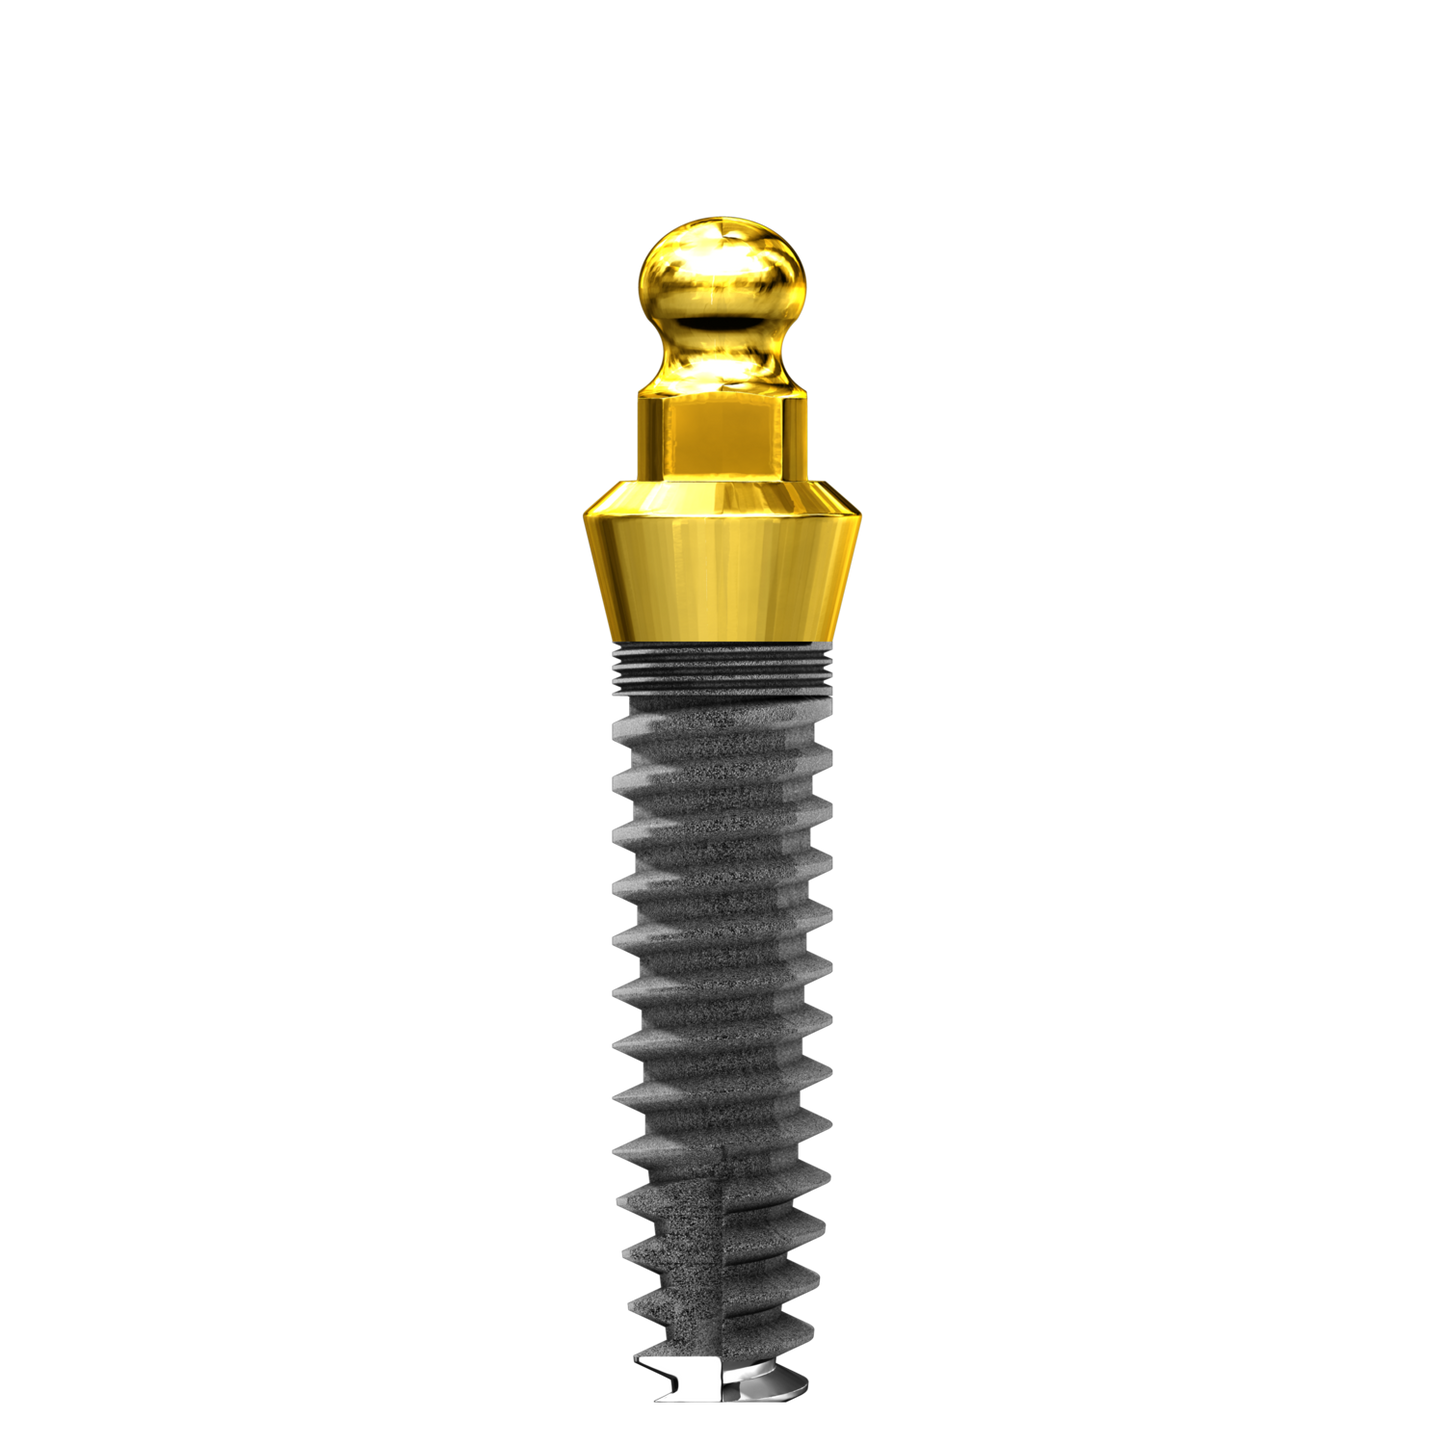 4.0mm x 16mm ISI C&B One Piece Implant